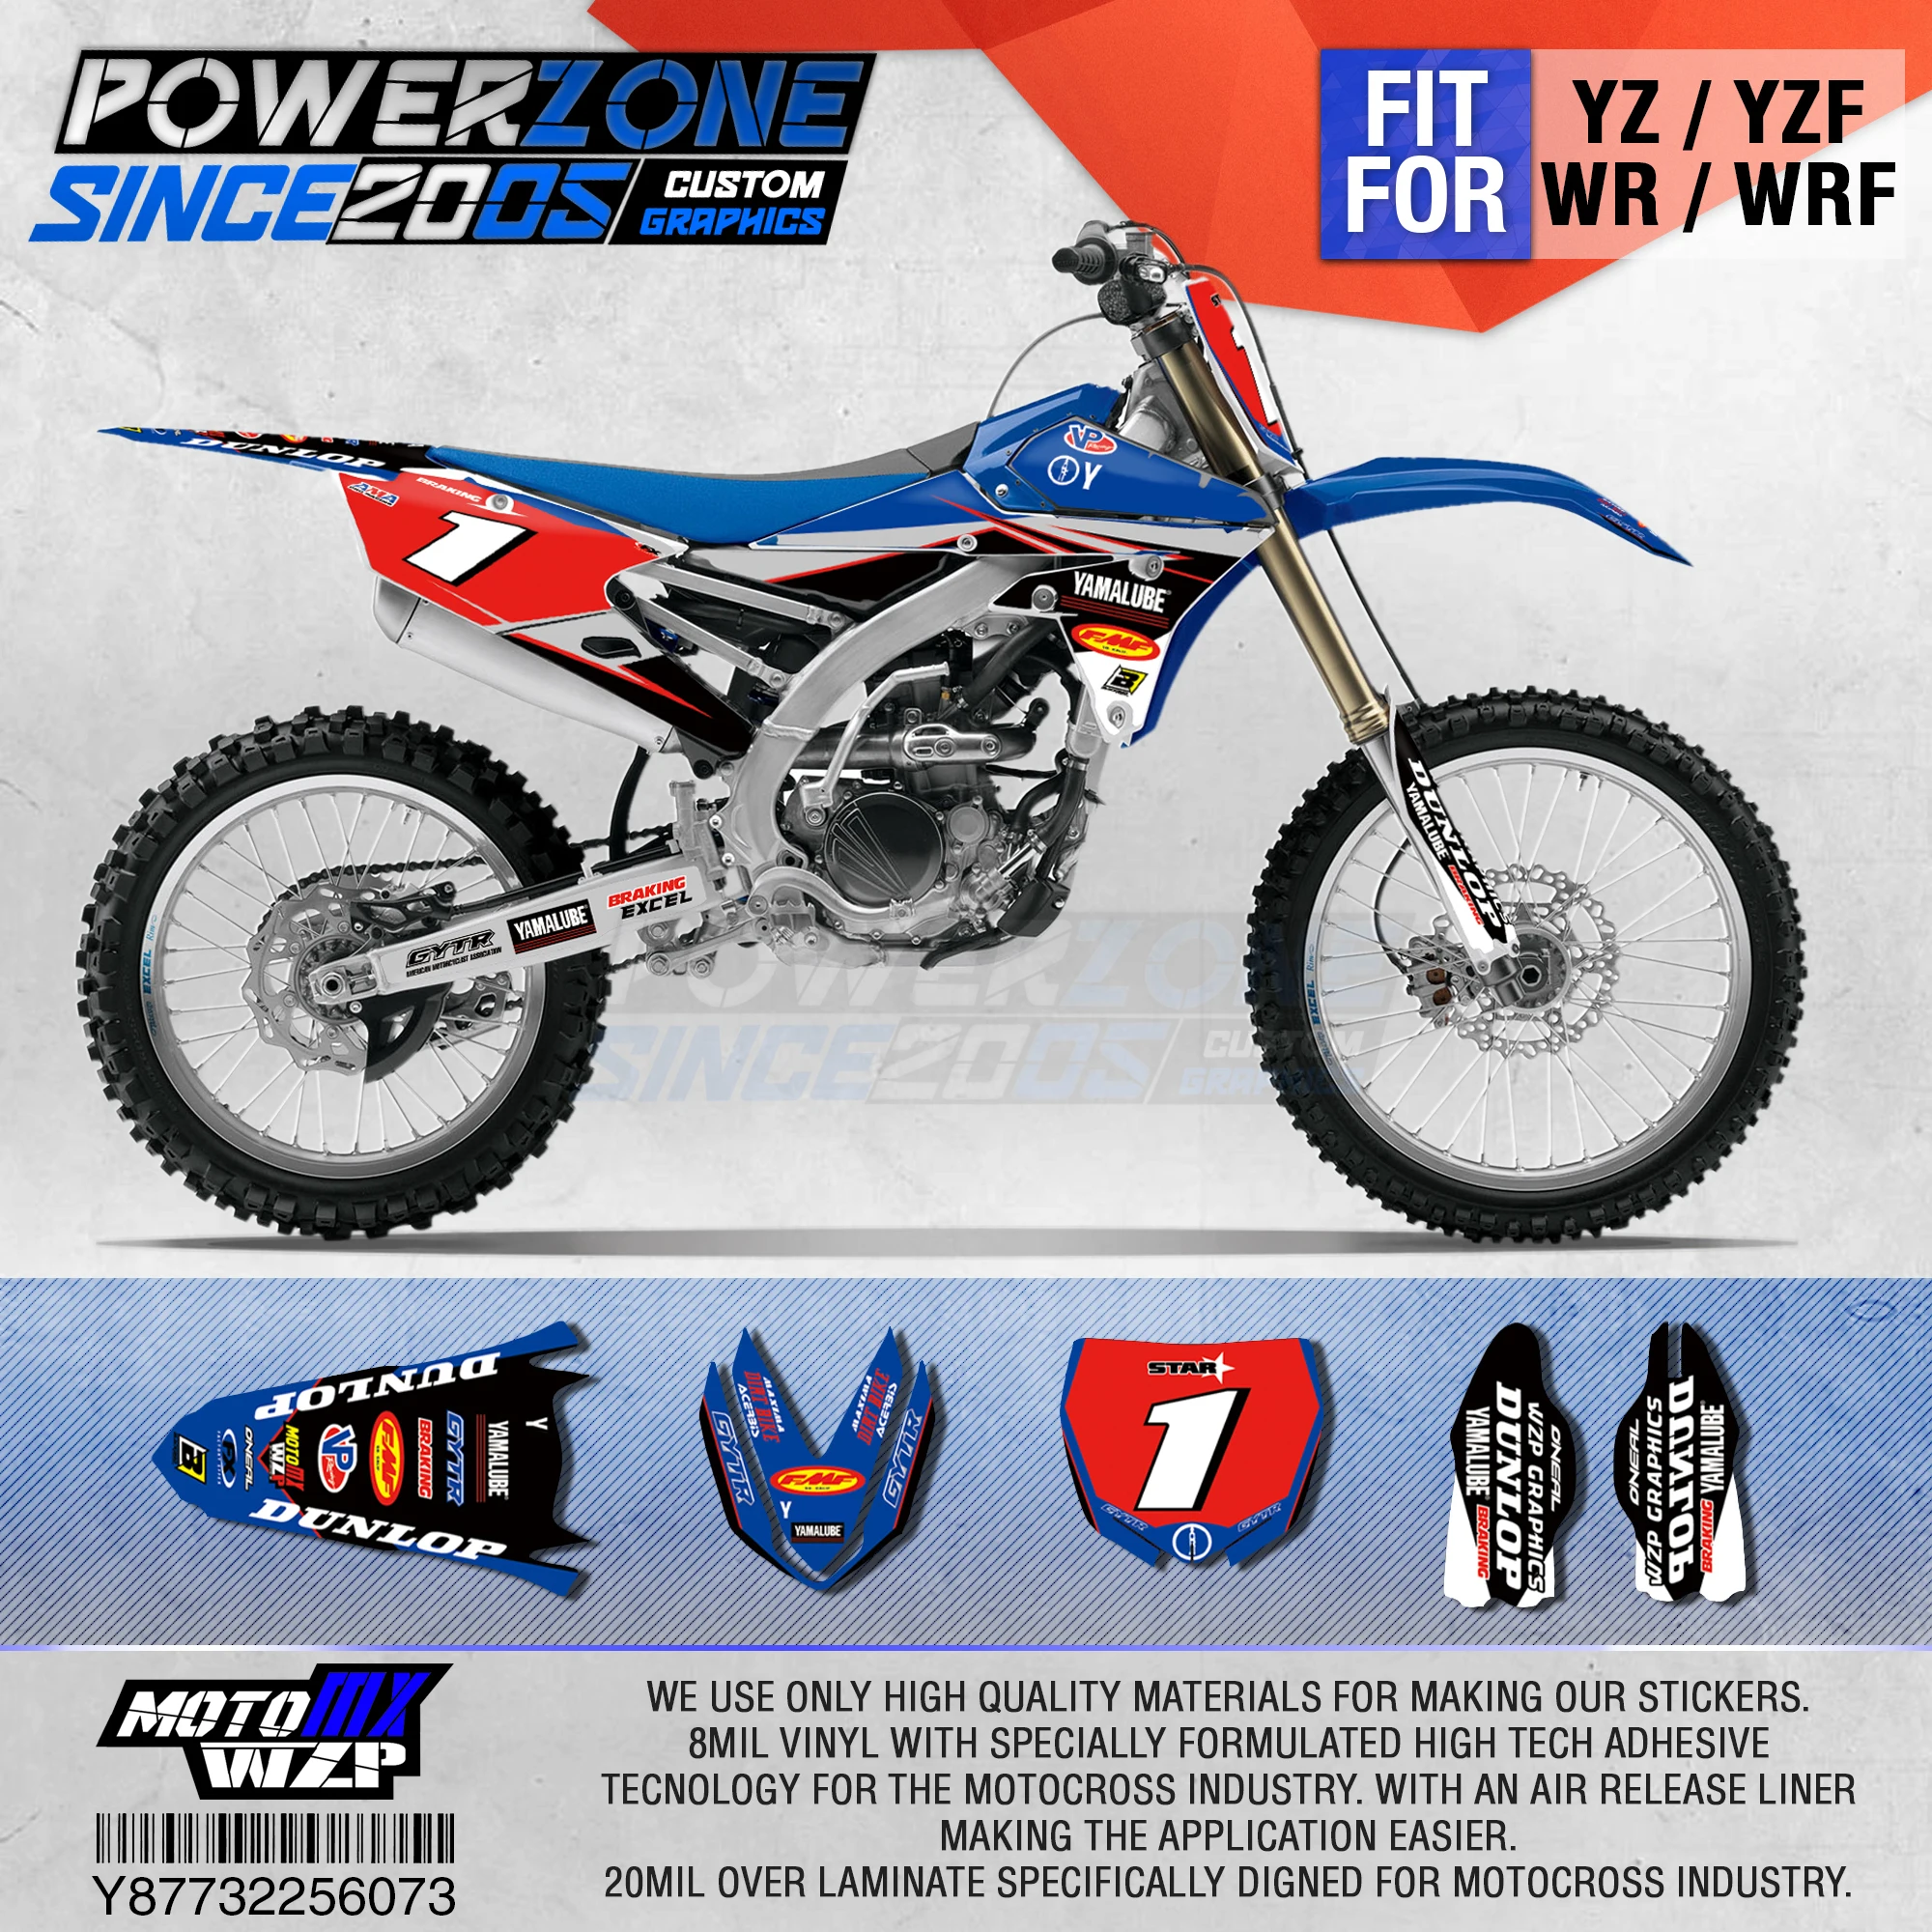 

PowerZone Customized Team Graphics Backgrounds Decals 3M Custom Stickers For YAMAHA YZF250FX 14-18 YFZ 19 YZF450 14-17 18-19 073